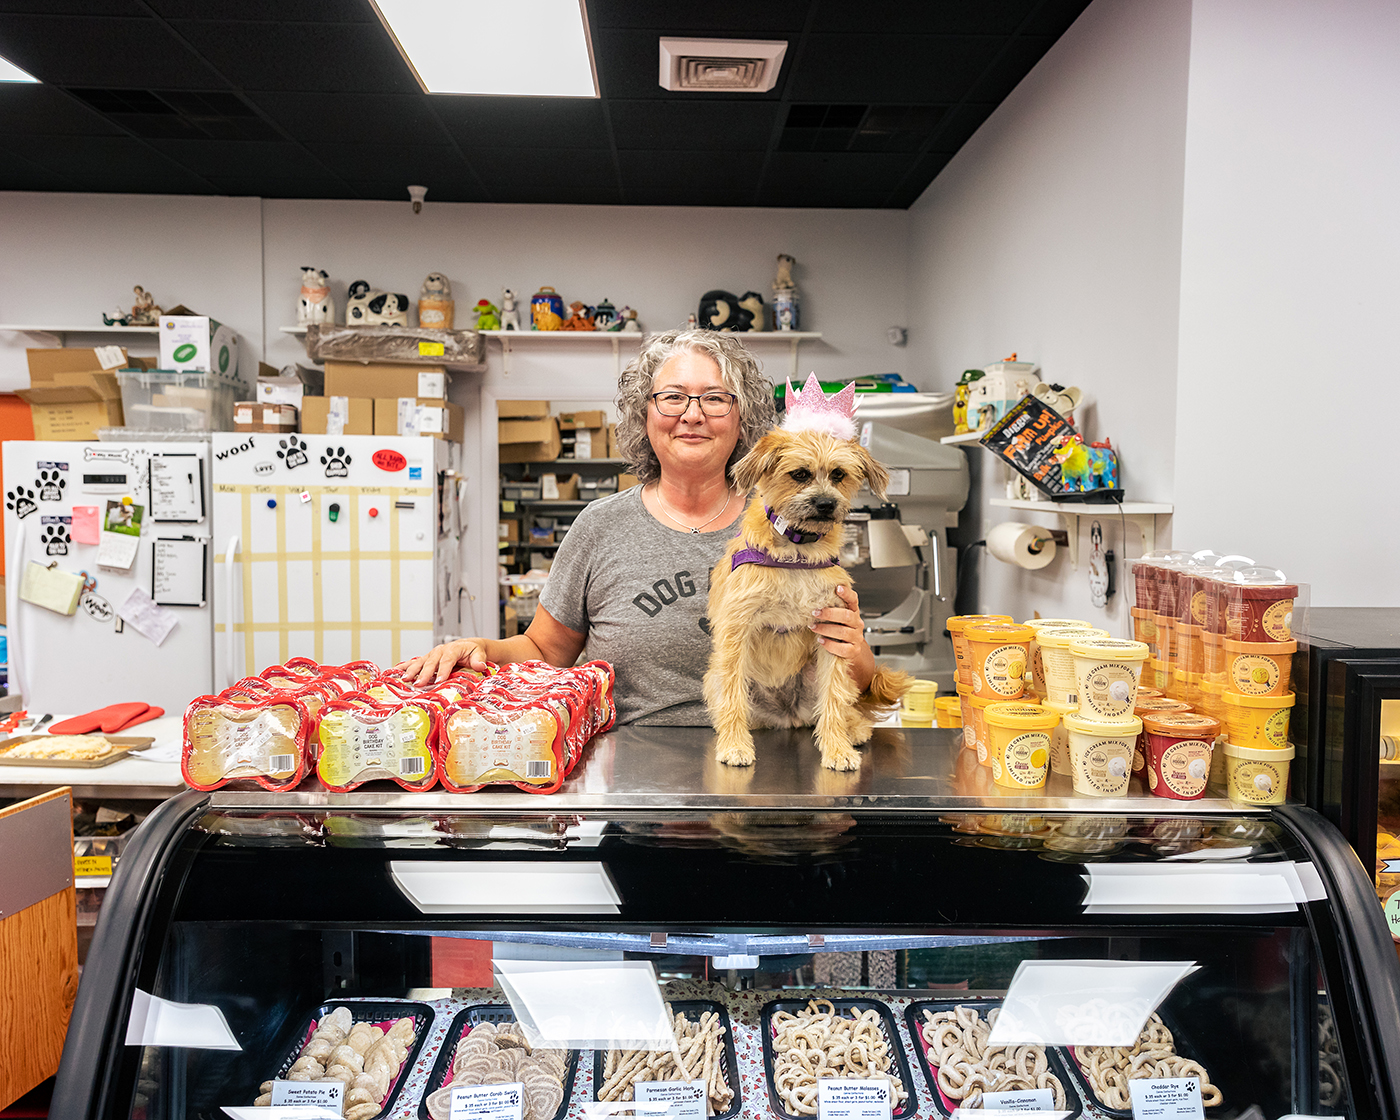 Ma and Paws’ handmade treats are made out of a GMO-free, whole wheat flour base with savory and/or sweet ingredients added.